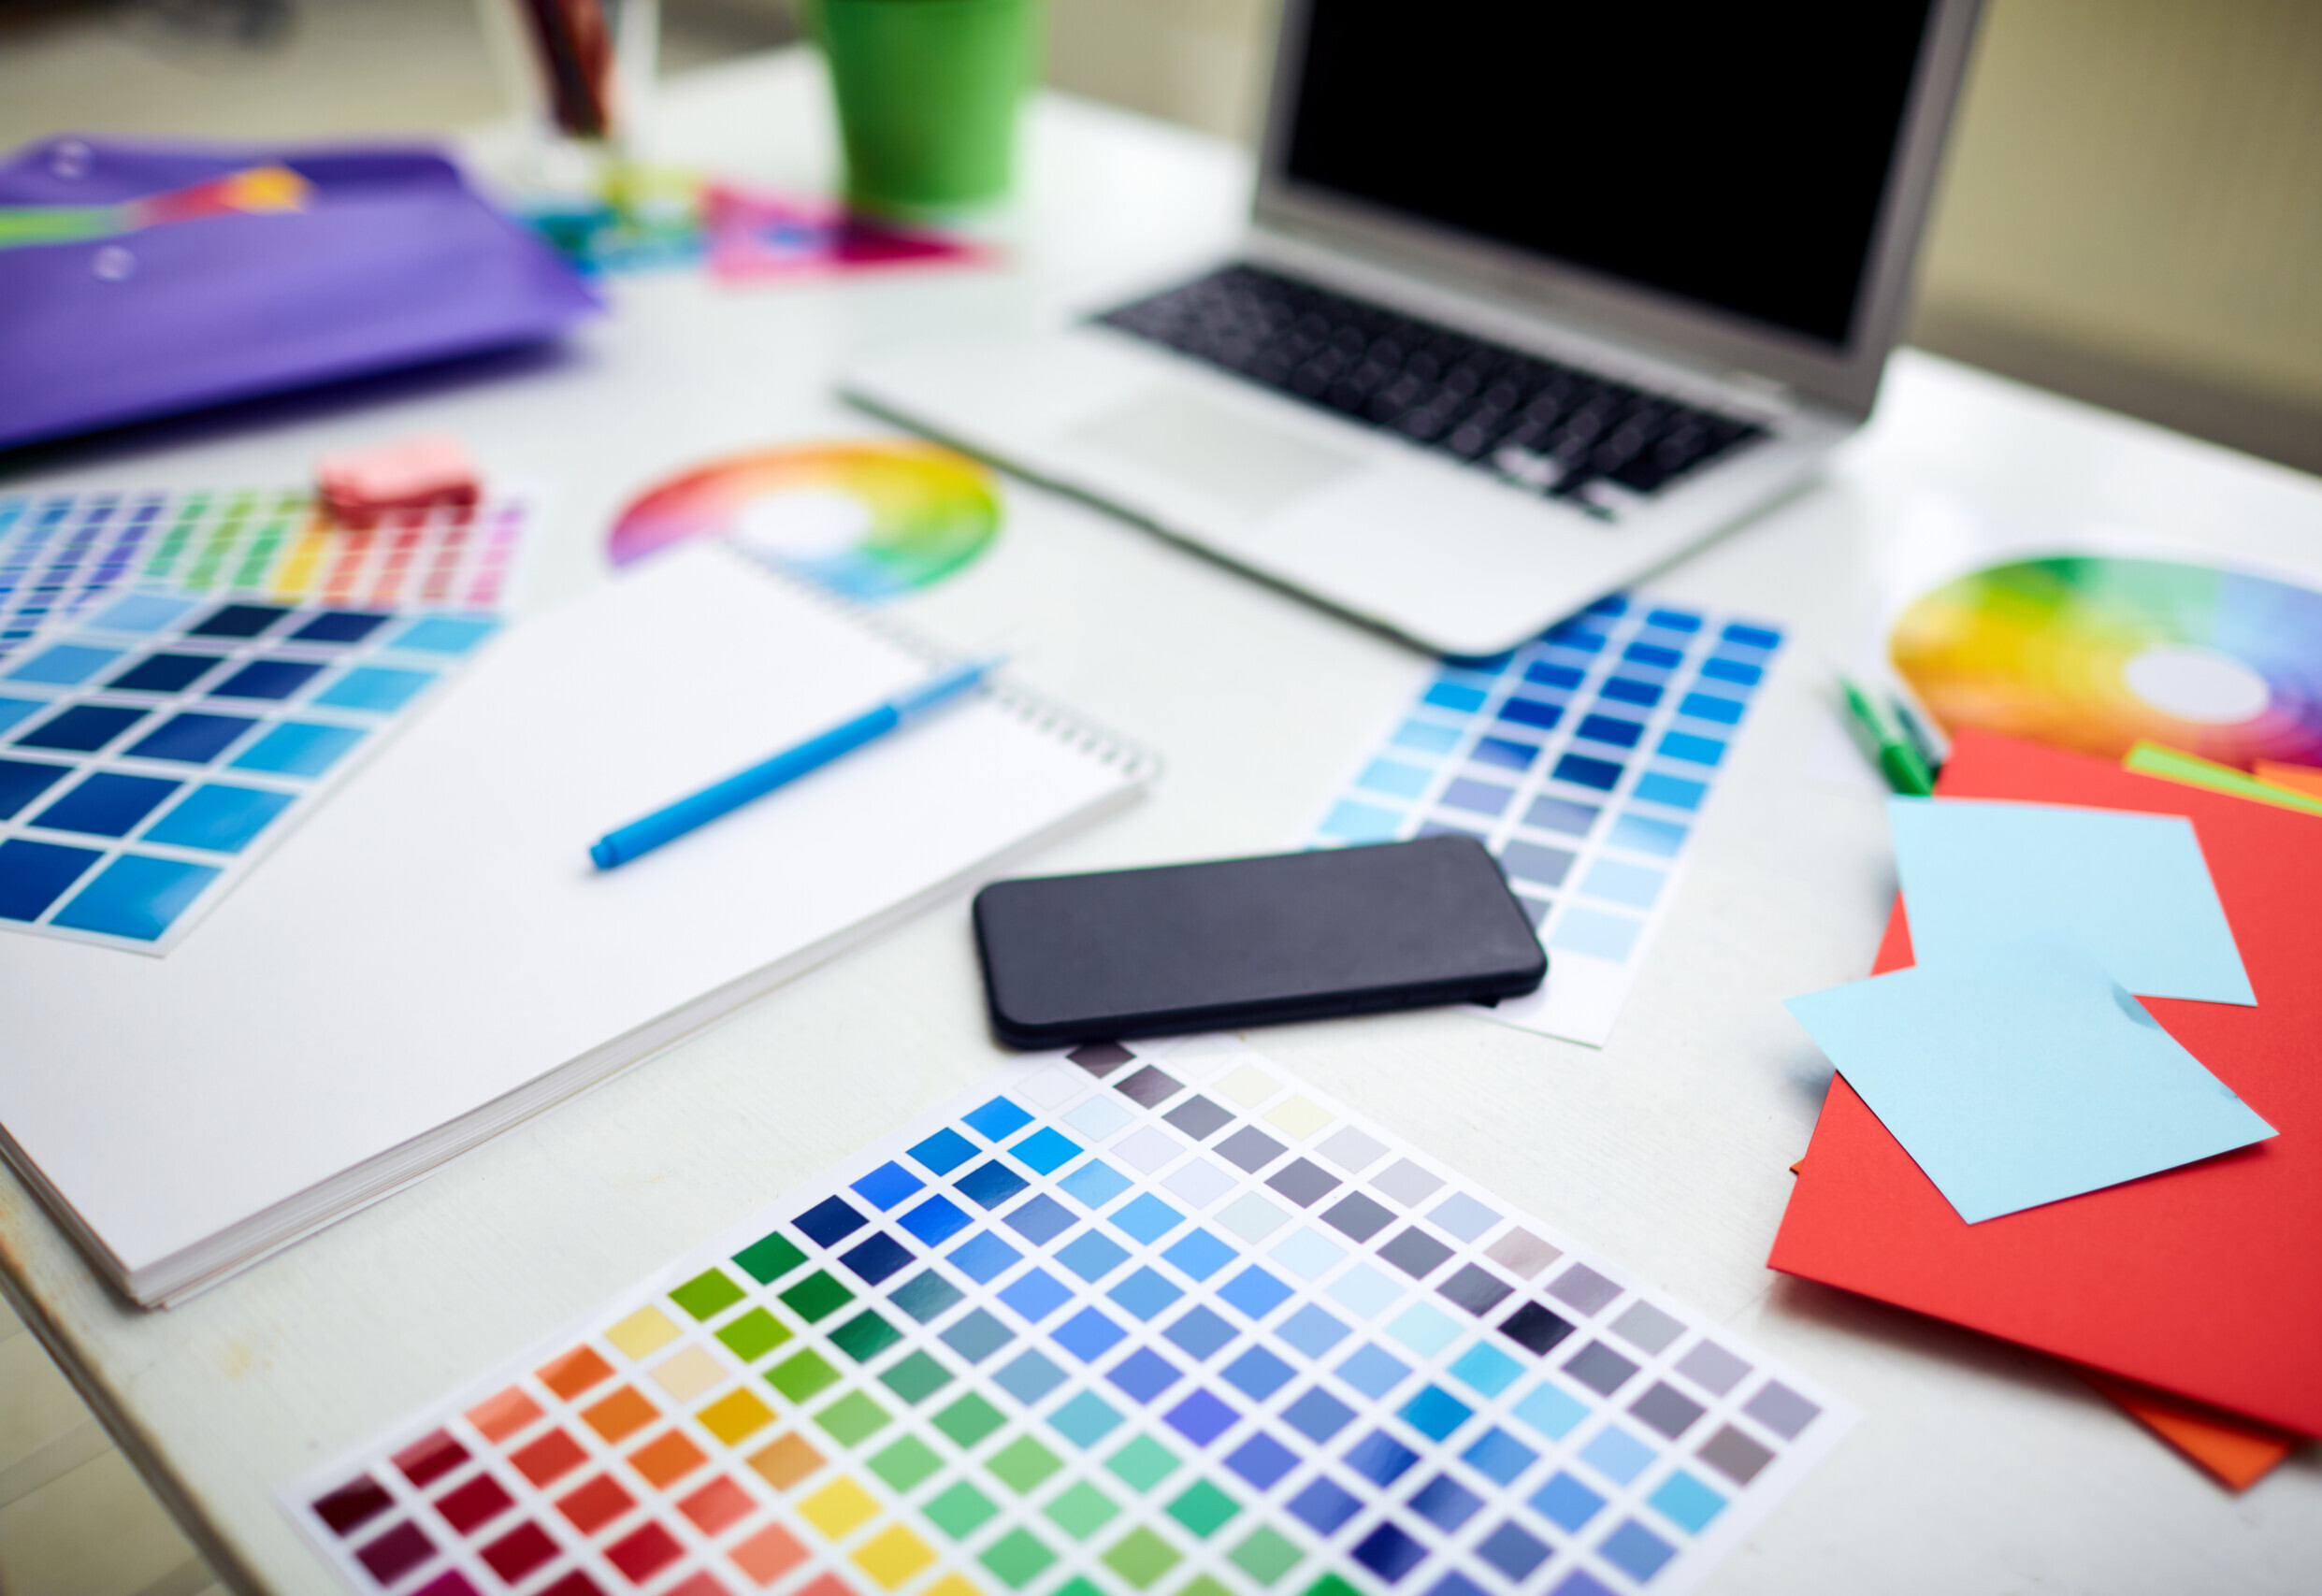 Get Experienced Service with Graphic Design at Streamline Print and Design.